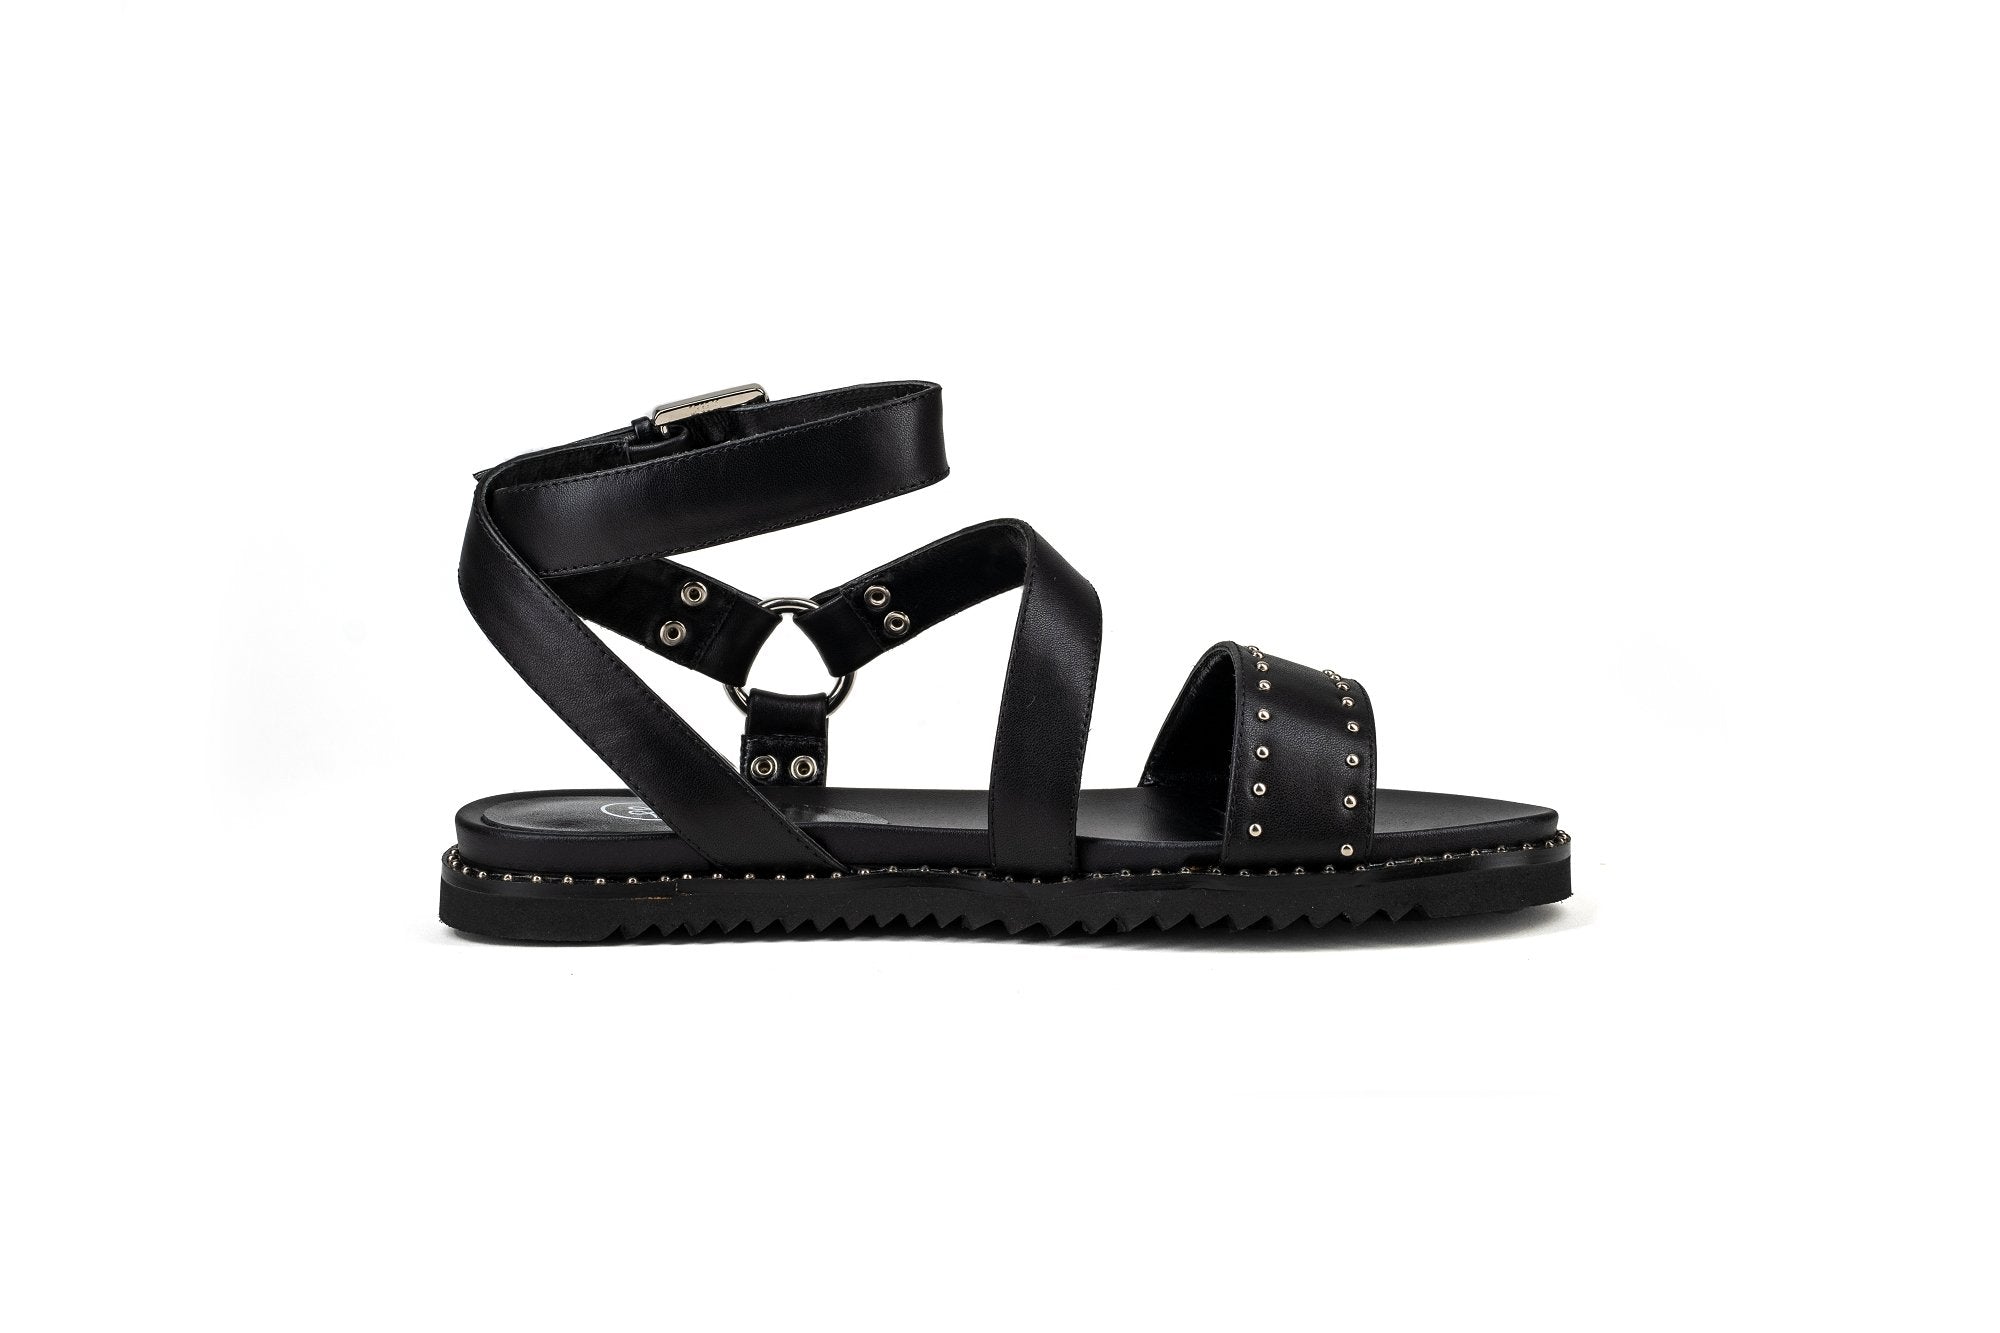 Anne Sandal Black-PREORDER Flats by Sole Shoes NZ F17-36